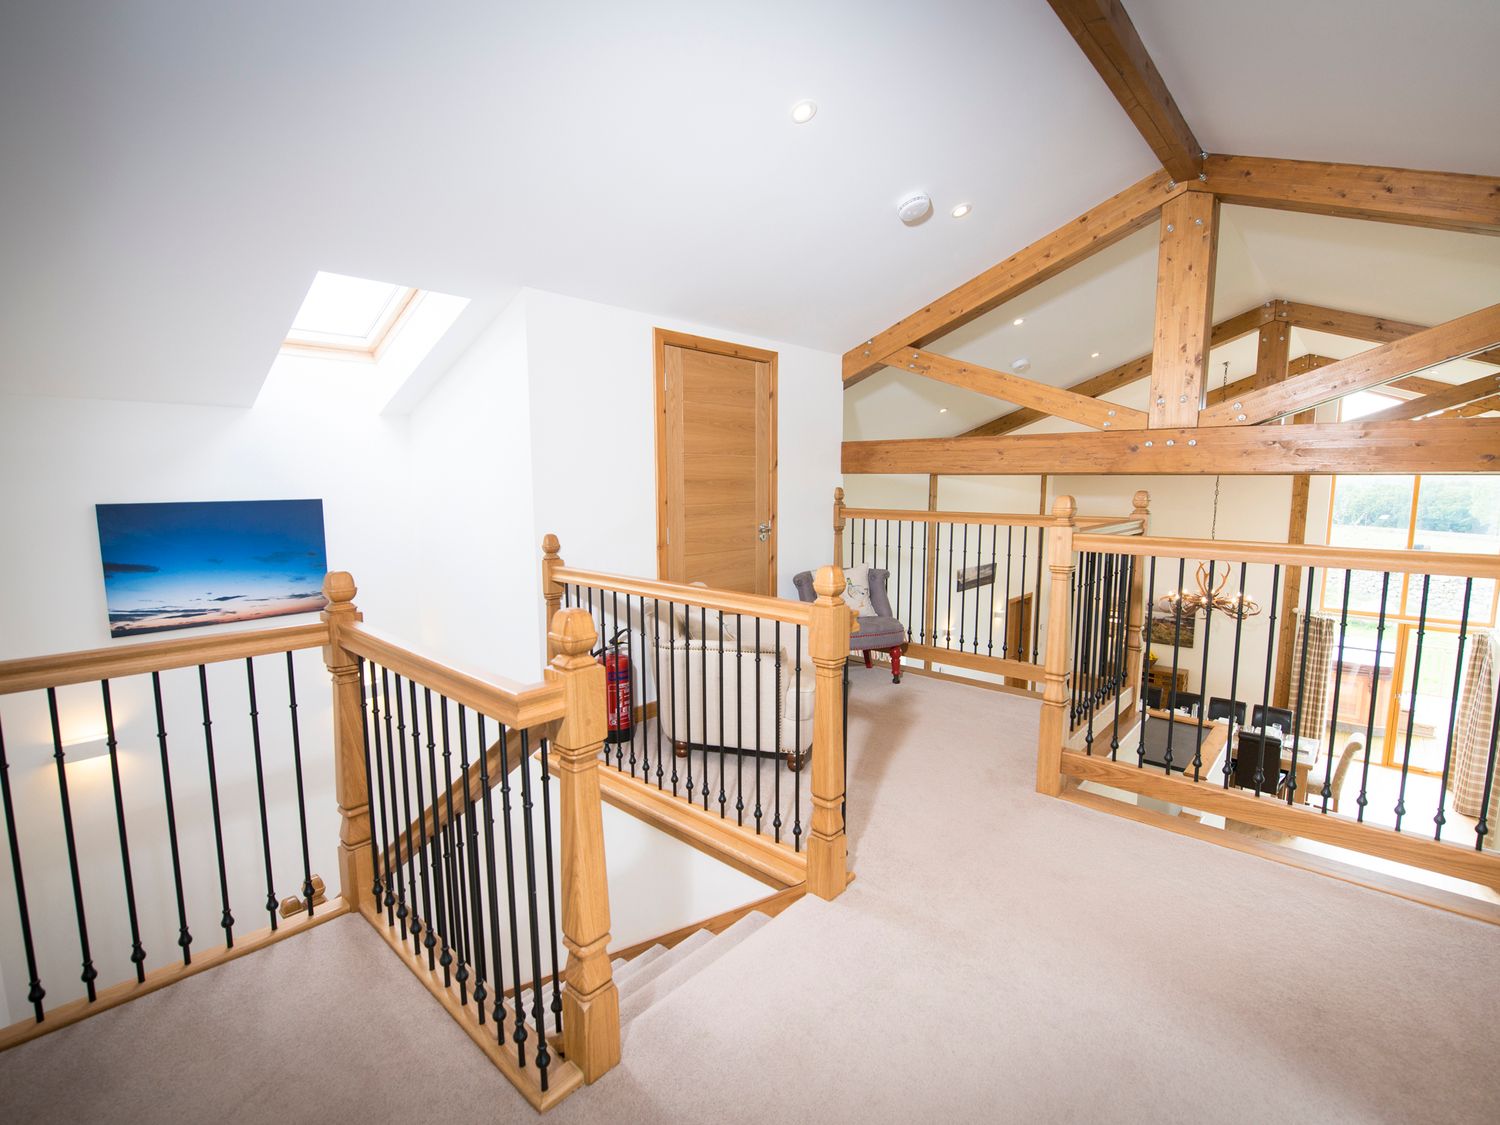 Aurae is in Cawdor, Highlands. Four-bedroom, luxury log cabin with hot tub and sauna. Rural. Family.